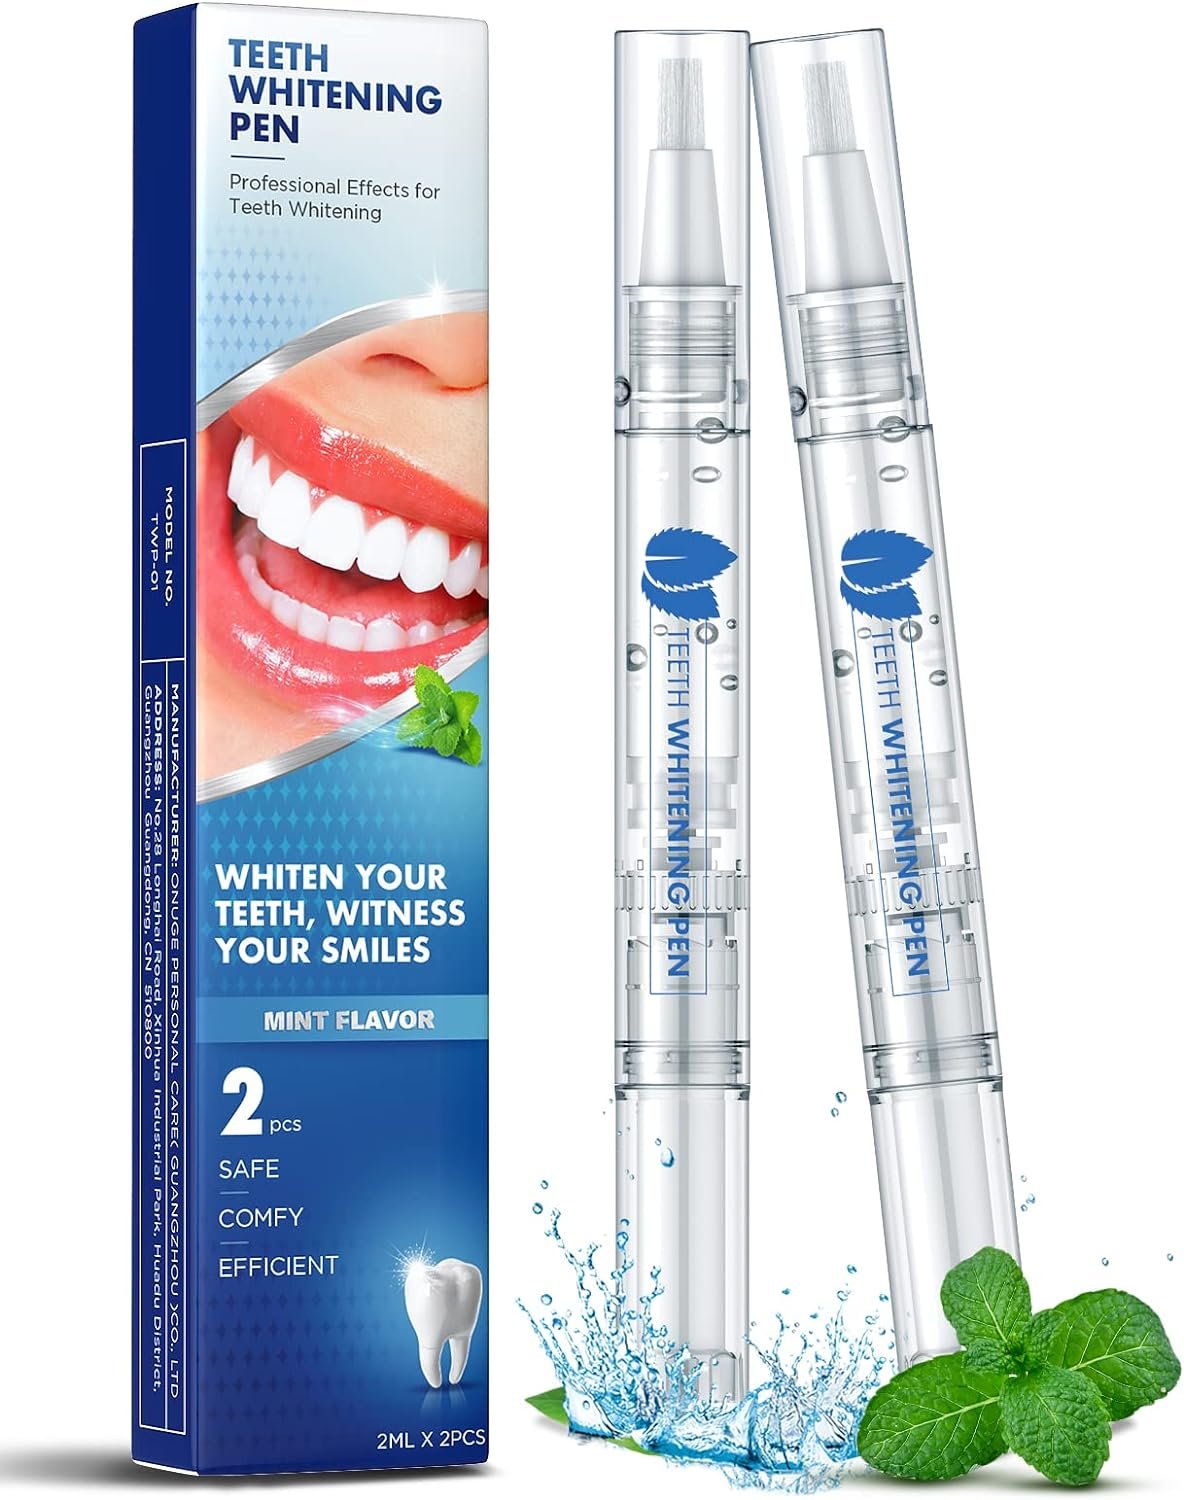 SANHE Teeth Whitening Pen for Sensitive Teeth, Safe  Effective, Painless Treatments for Tooth Whitening, Easy to Use, Fast Whitening, Travel-Friendly, Mint Flavor, 2 Pack